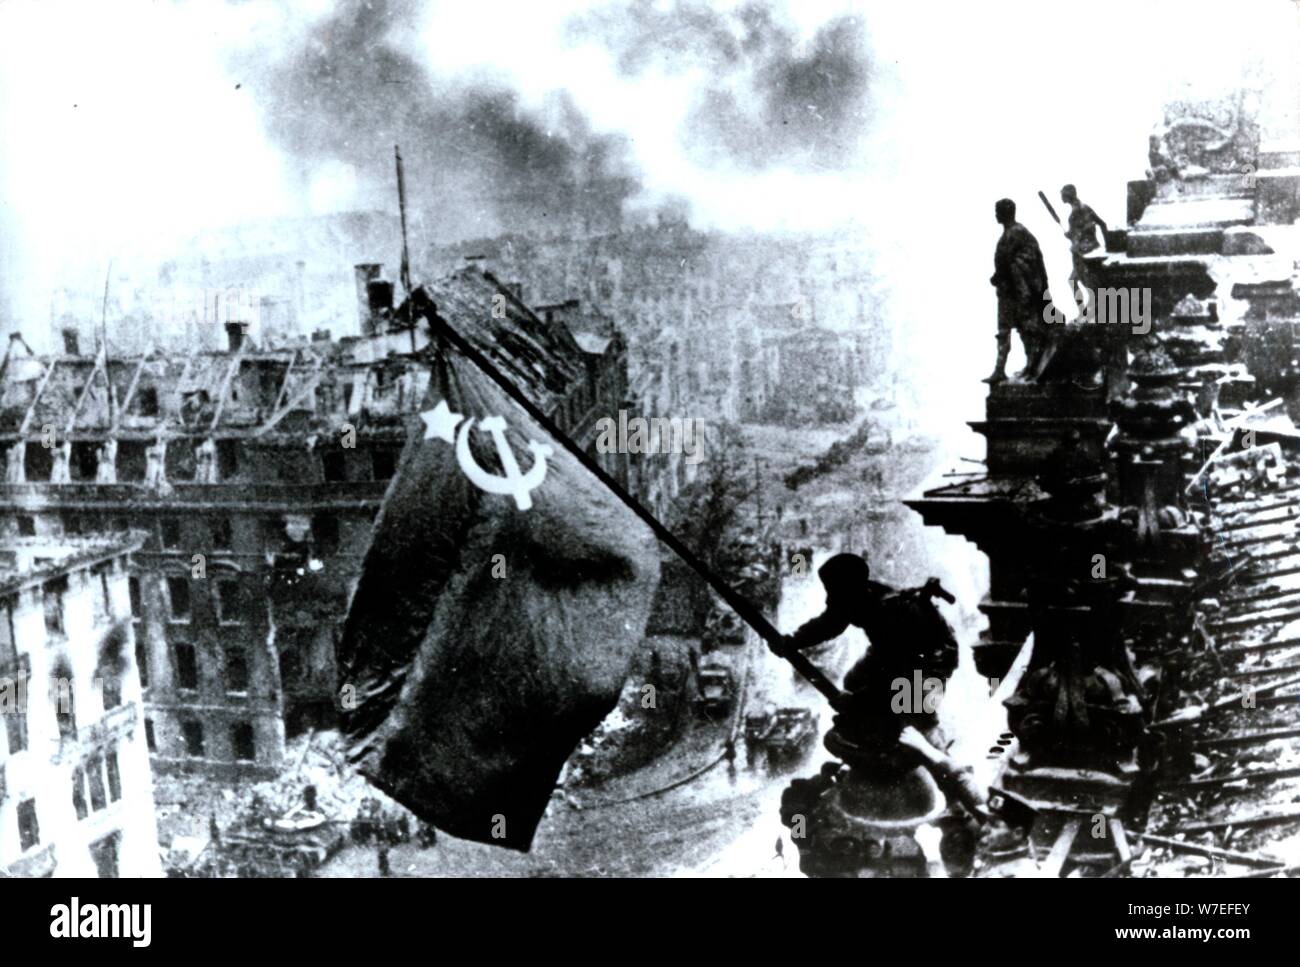 Raising a flag over the Reichstag, 2 May 1945. Artist: Yevgeny Khaldei Stock Photo